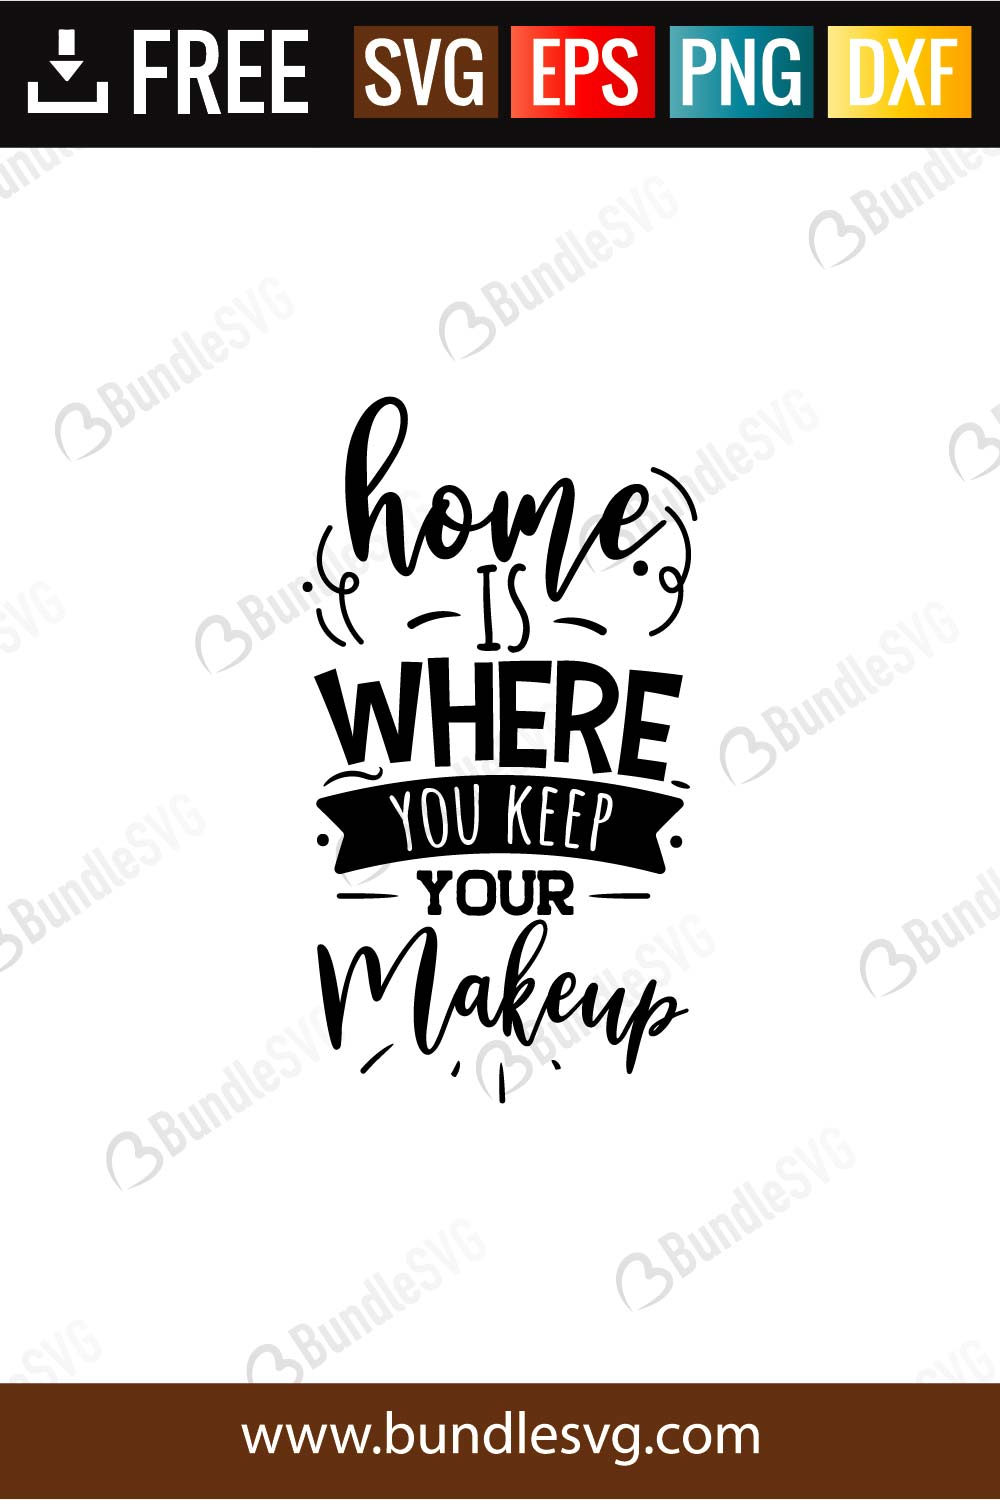 Download Home Is Where You Keep Your Make Up Svg Cut Files Bundlesvg